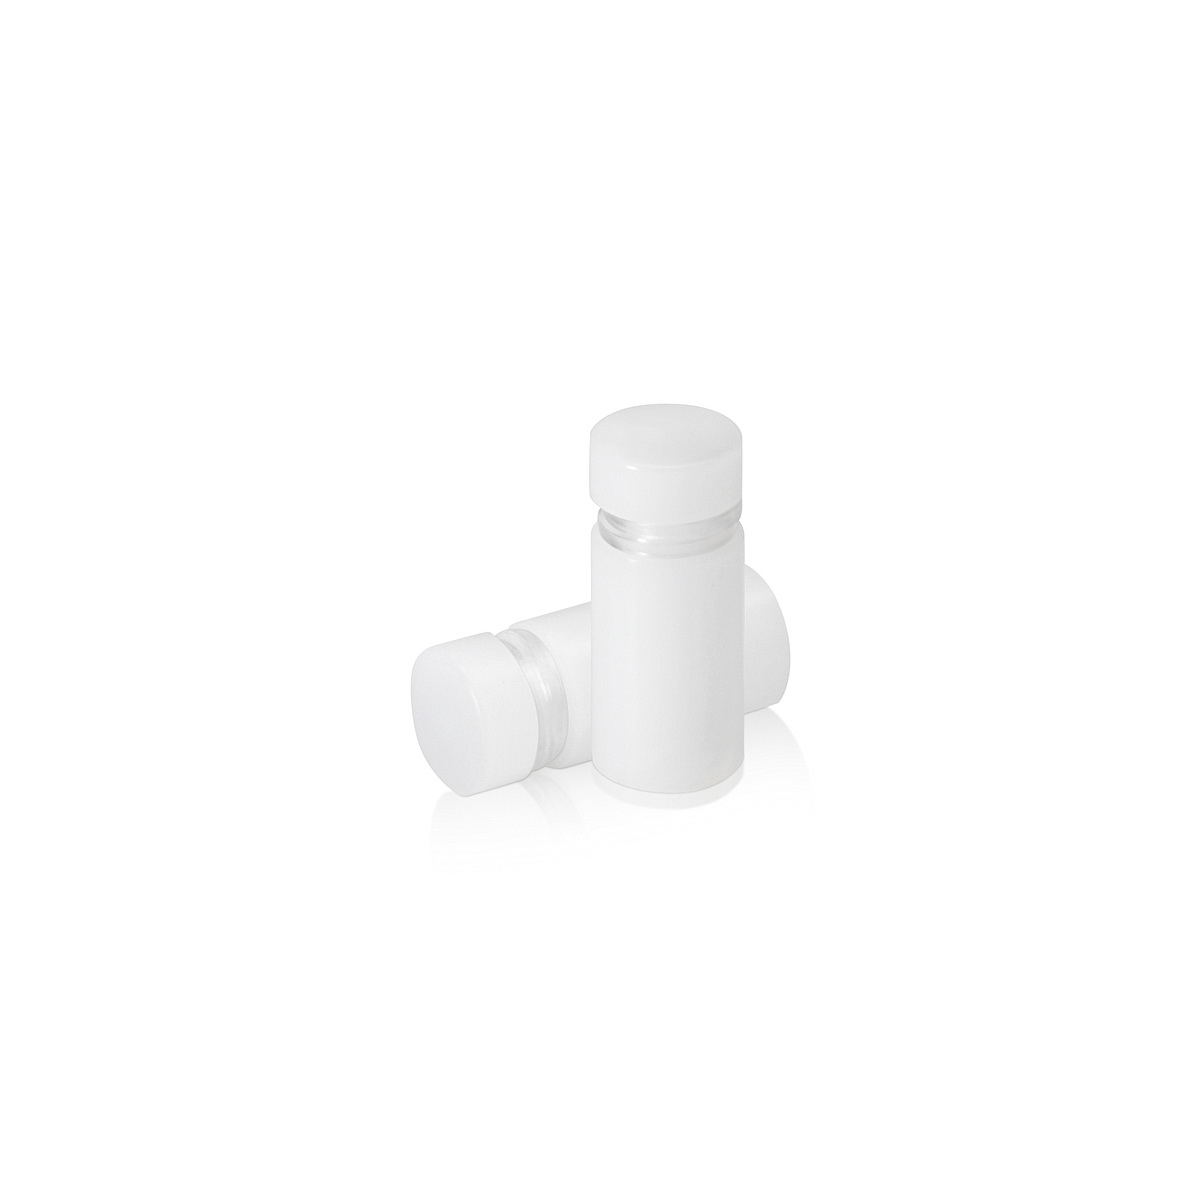 5/8'' Diameter X 1-3/4'' Barrel Length, White Acrylic Standoff. Easy Fasten Standoff (For Inside Use Only) Tamper Proof [Required Material Hole Size: 3/8'']